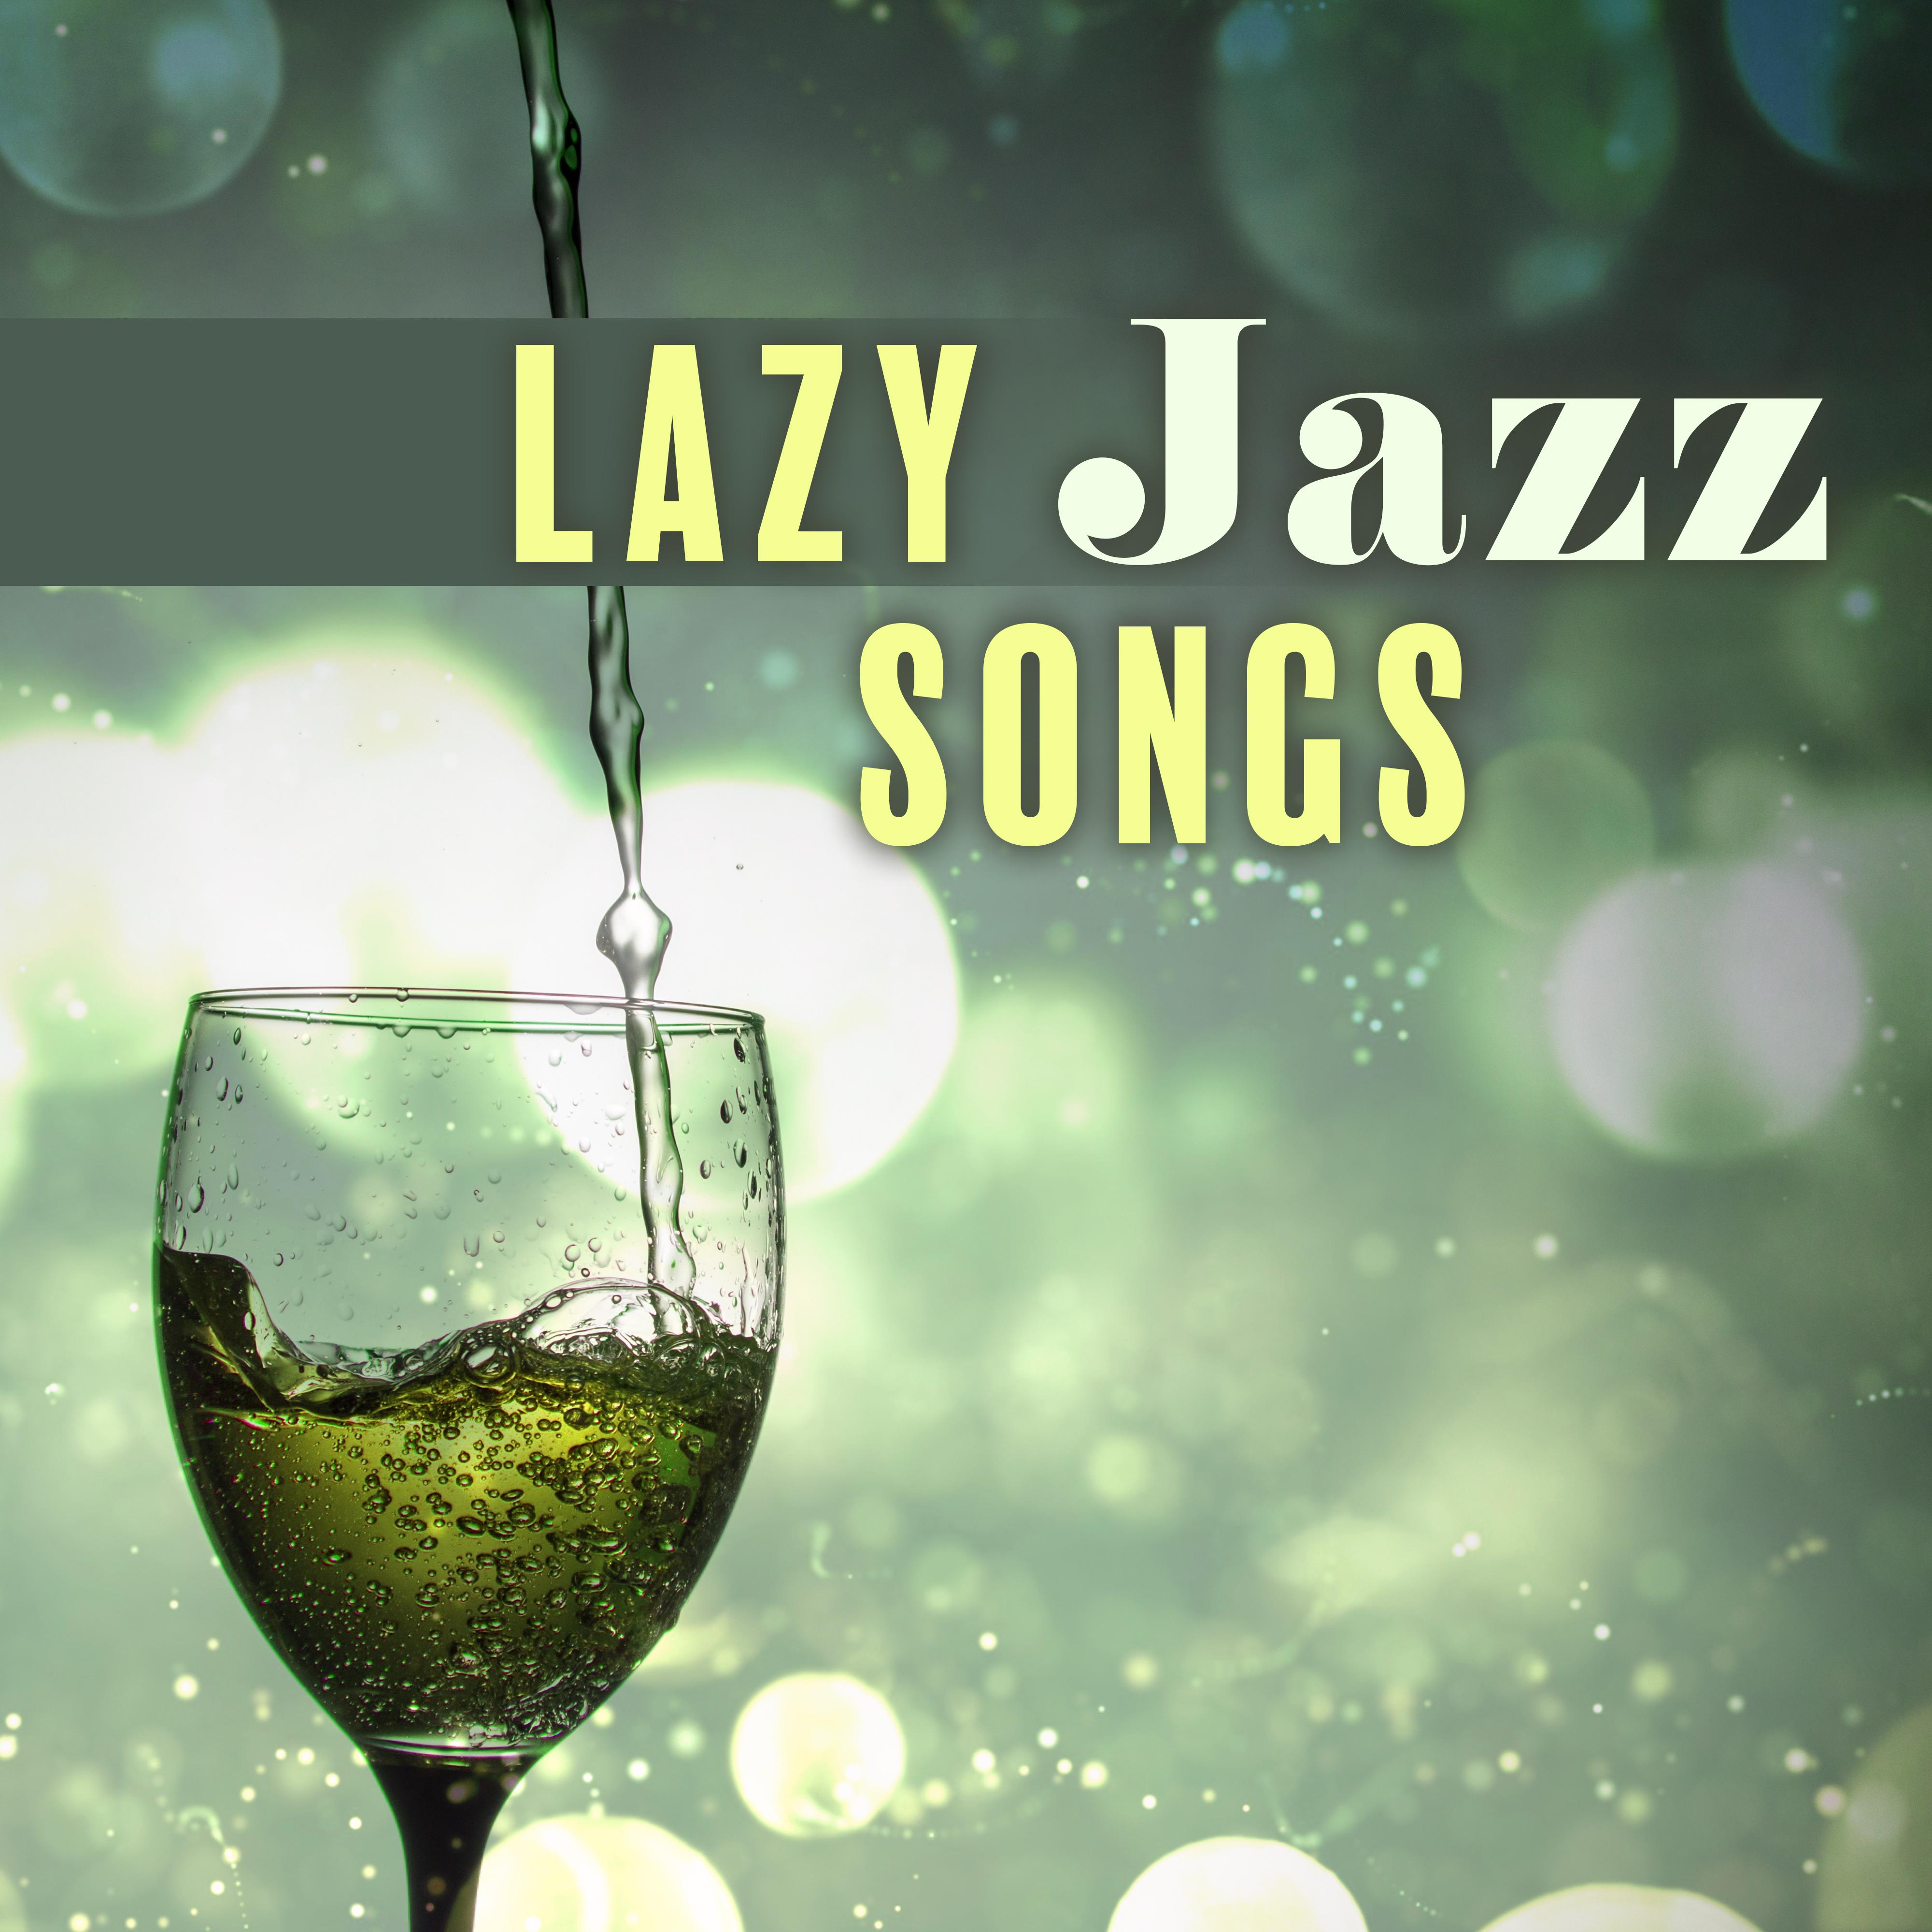 Lazy Jazz Songs – Peaceful Piano Melodies, Instrumental Music, Relaxing Jazz, Easy Listening